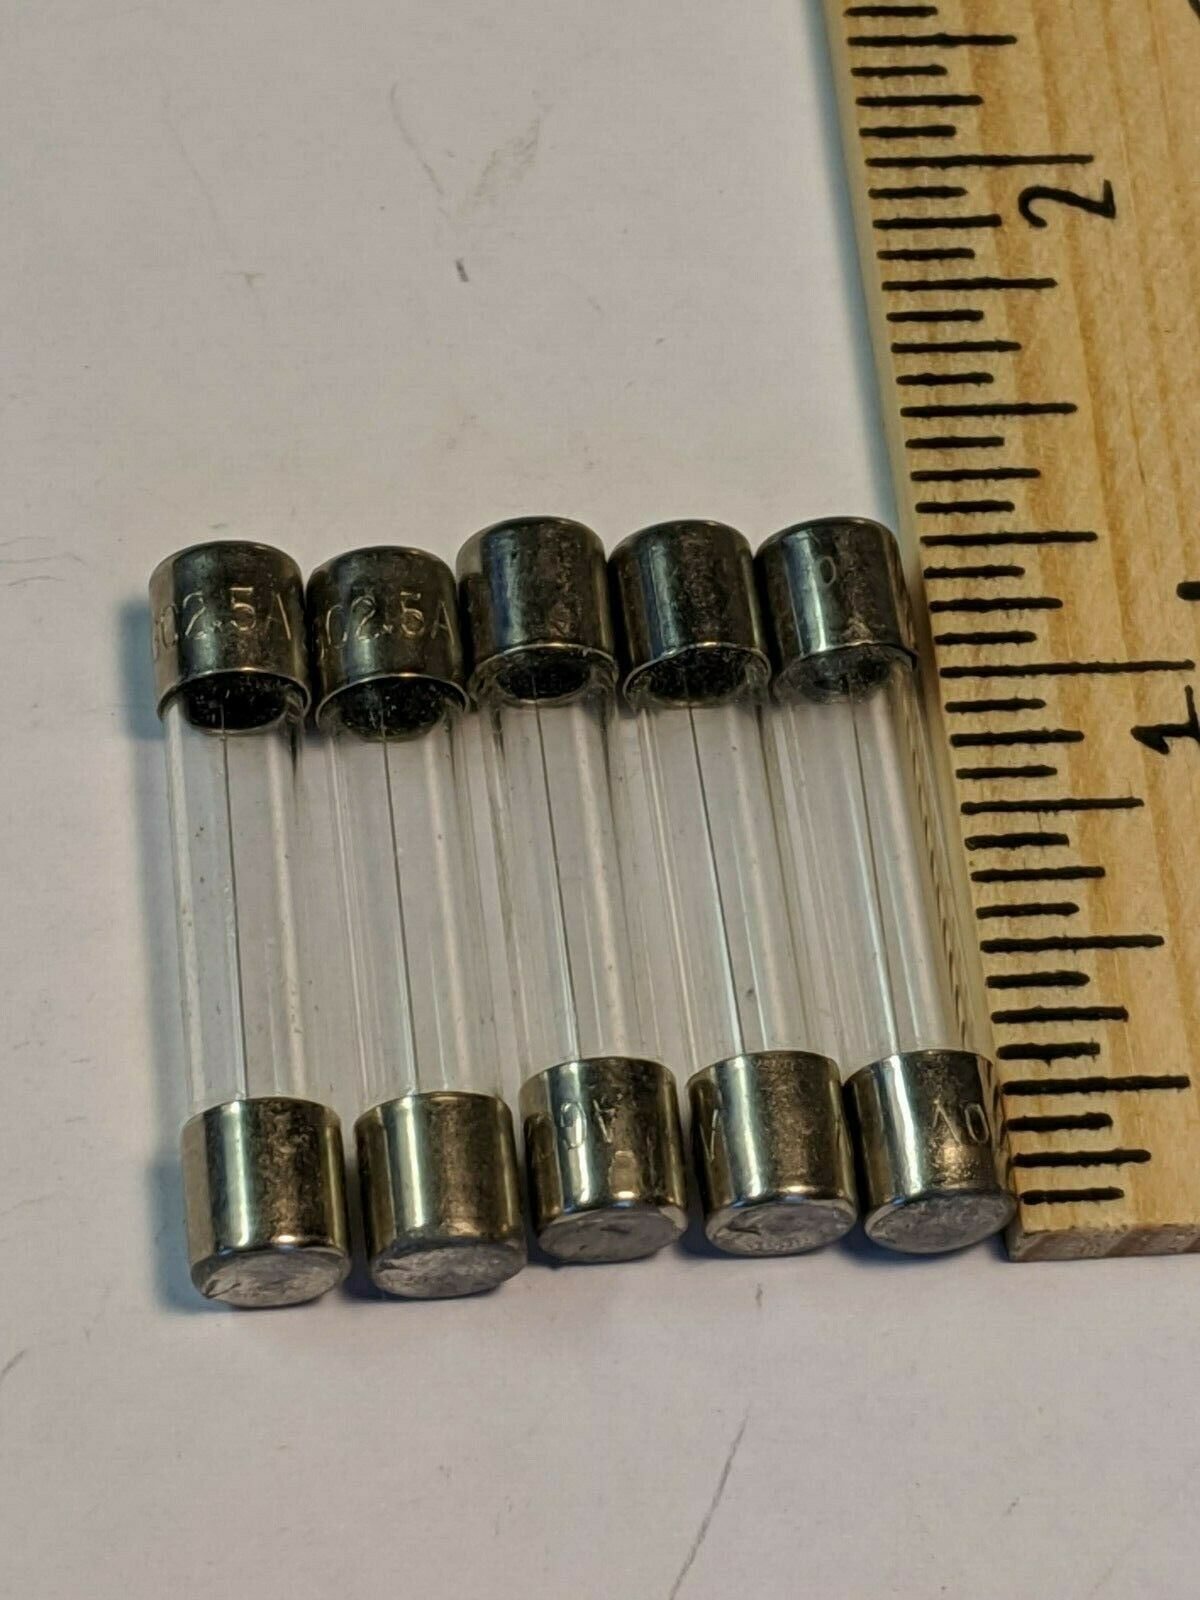 5 Pieces 2.5A Fast Blow Glass Fuse USA Made